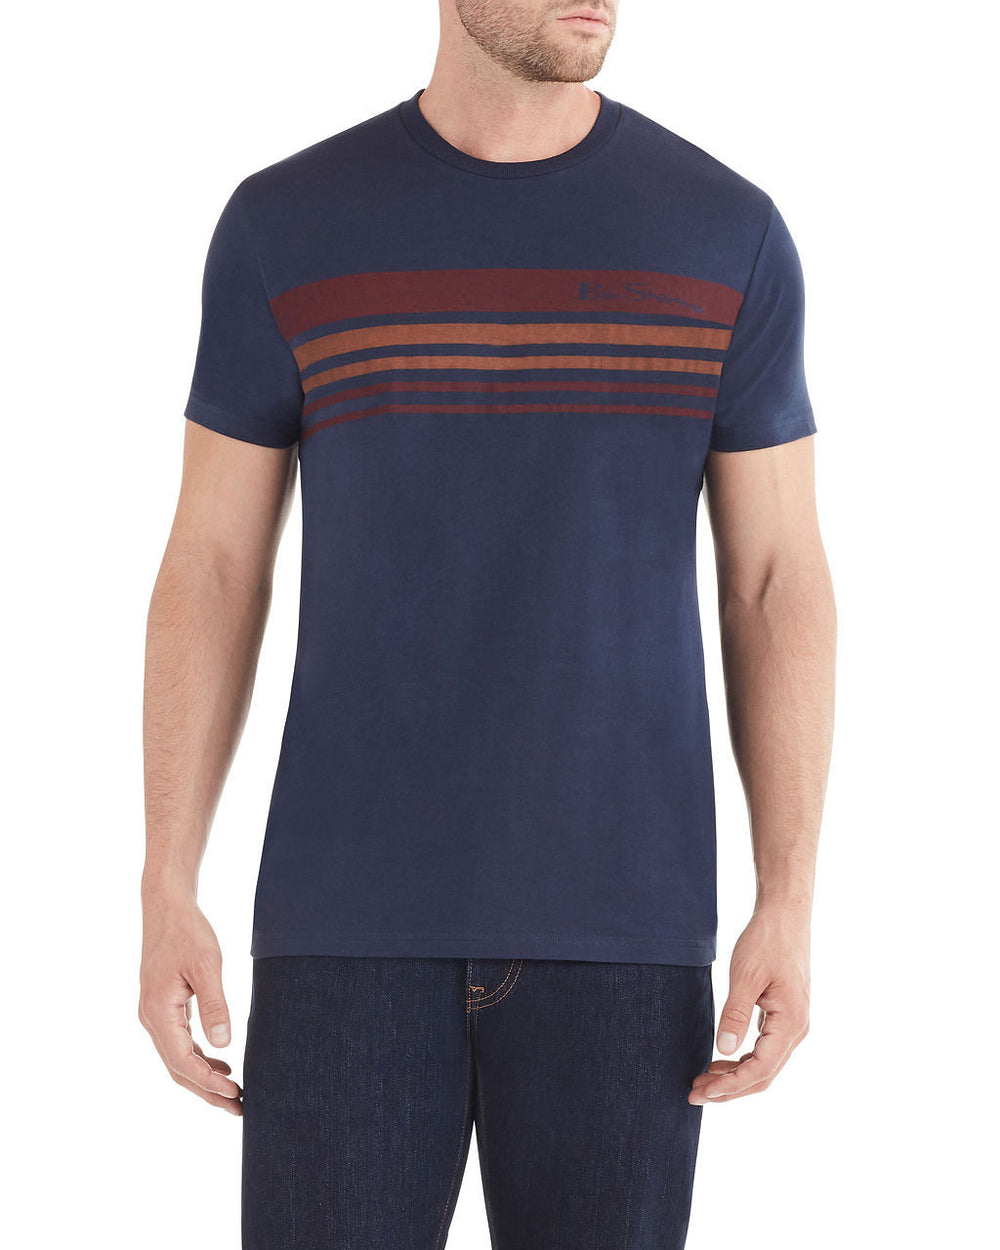 Ombre Stripe Print Styled T-Shirt - Navy